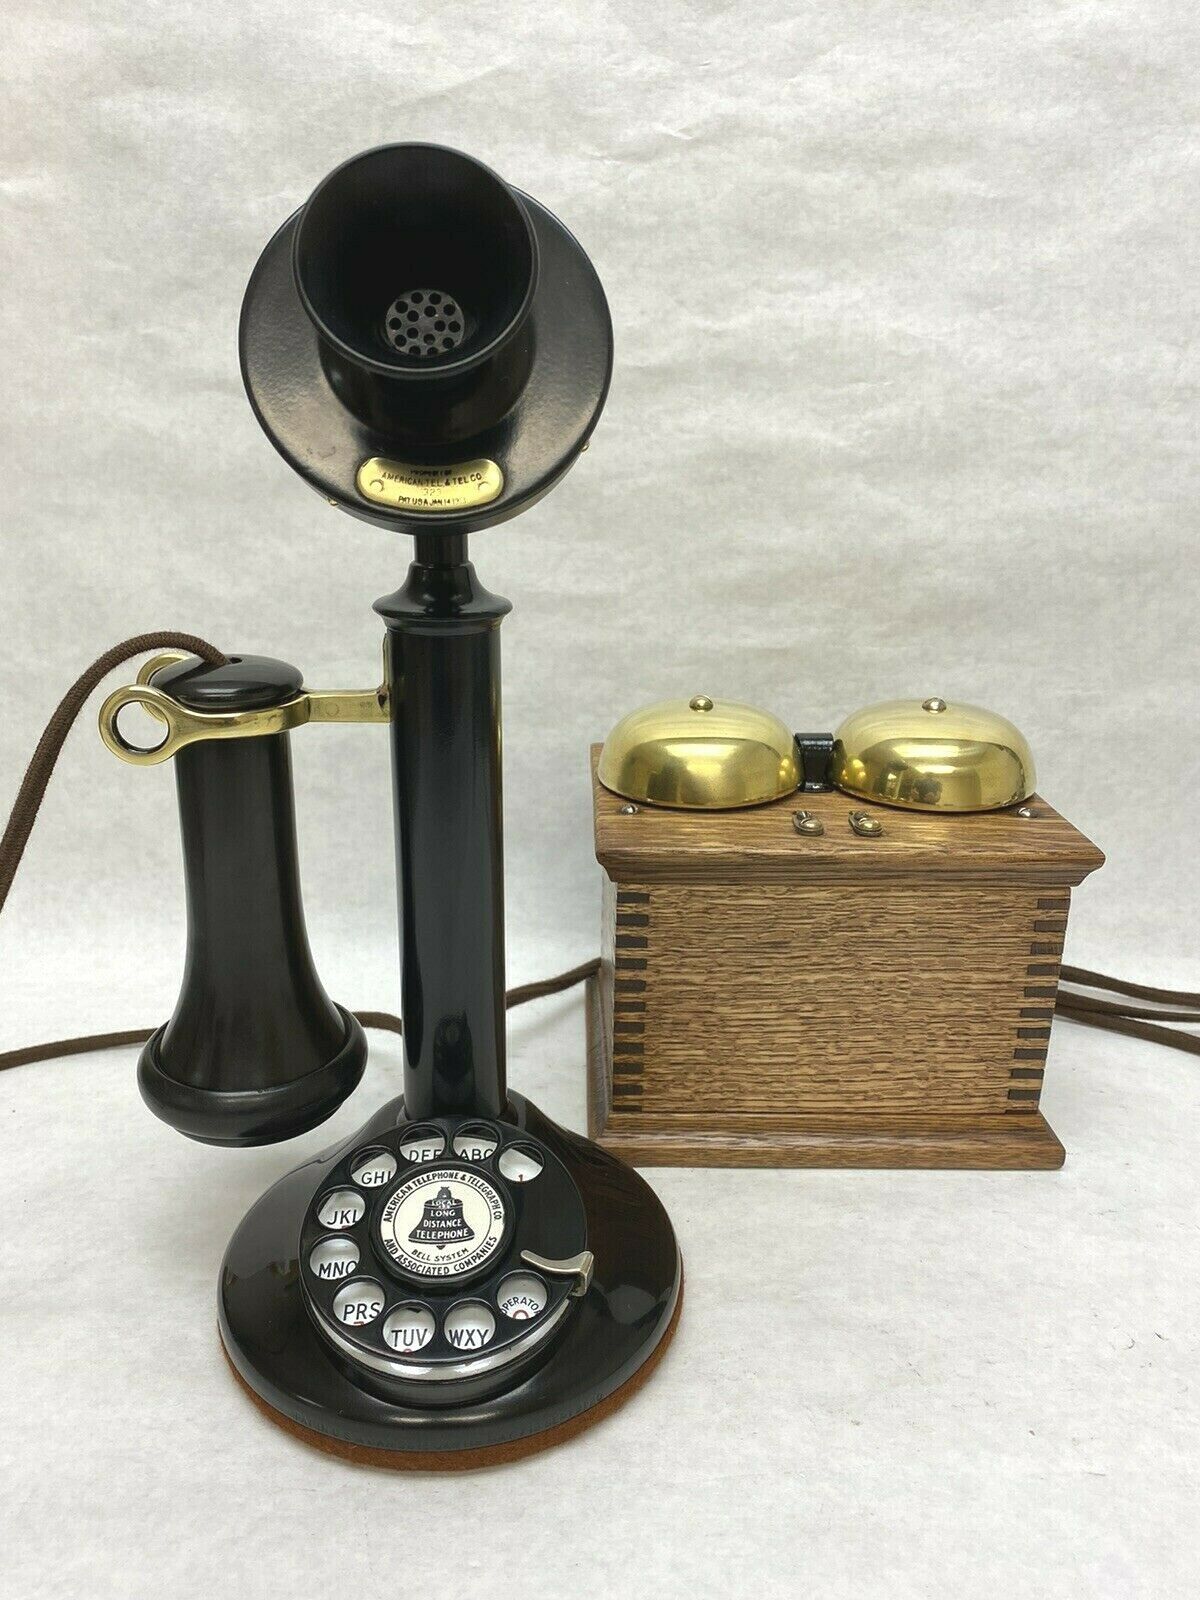 Western Electric Candlestick Telephone Restored Working